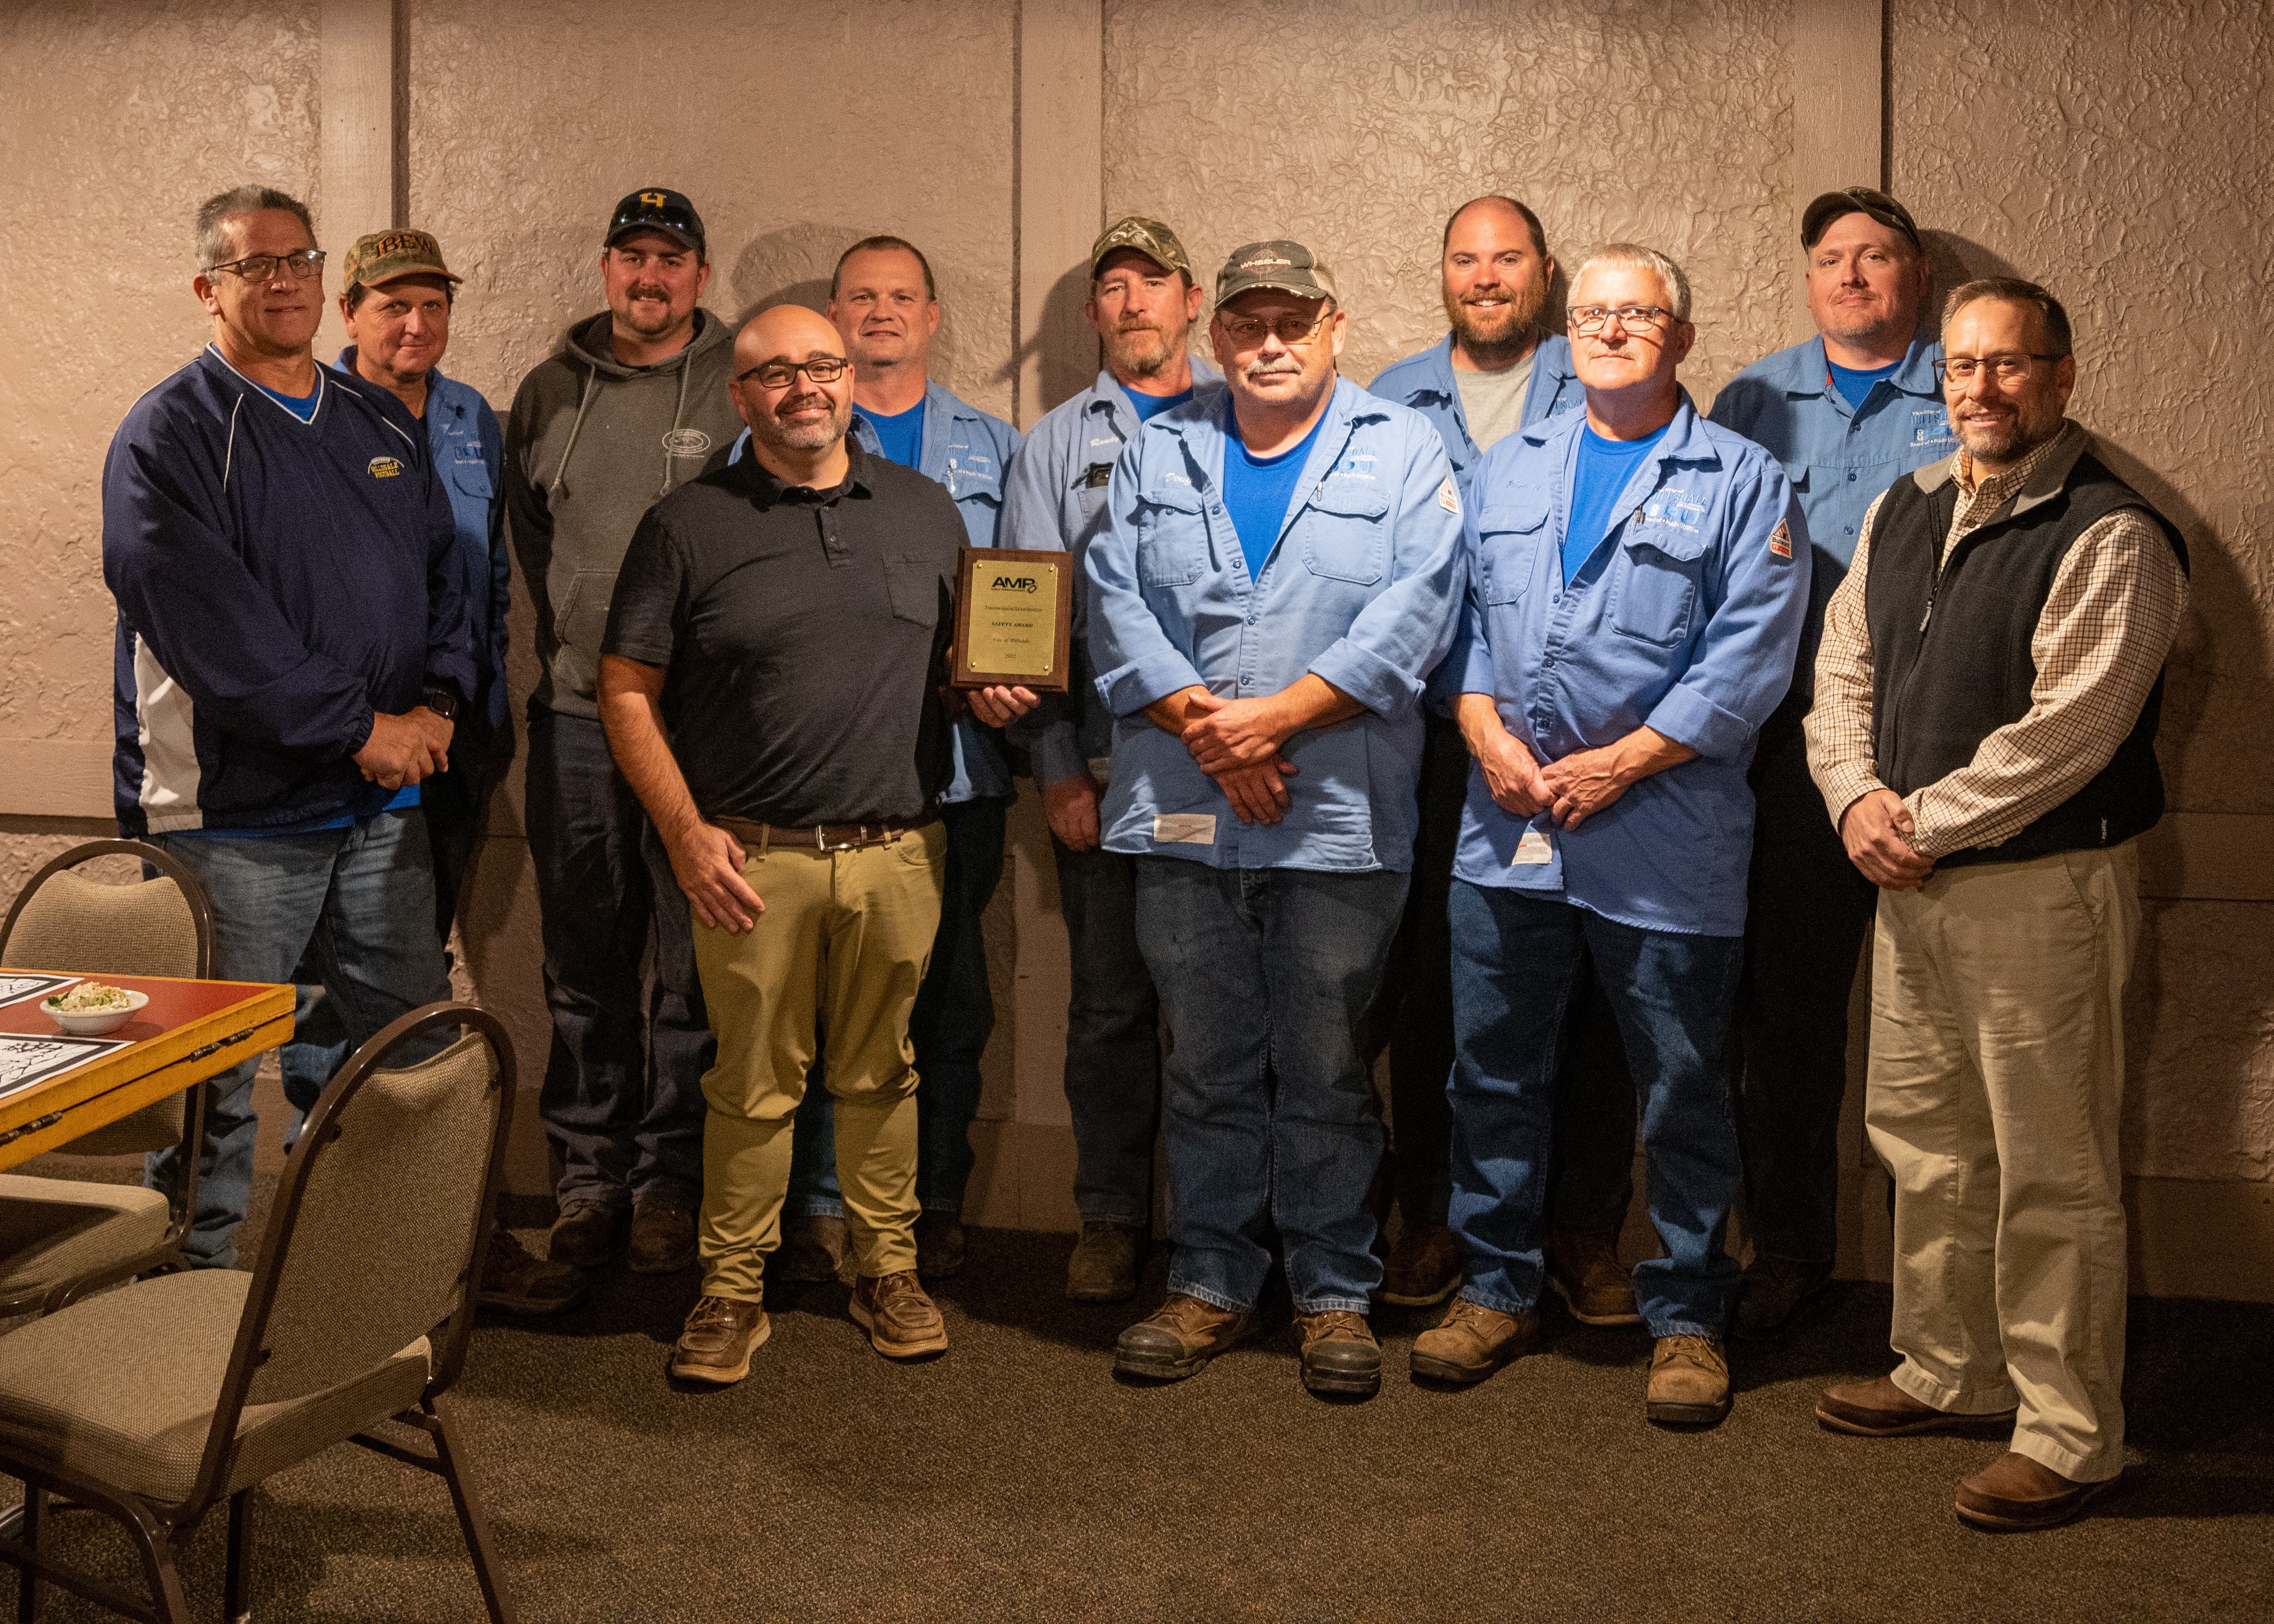 Hillsdale BPU electric distribution staff pose with the AMP Safety Award—Transmission and Distribution